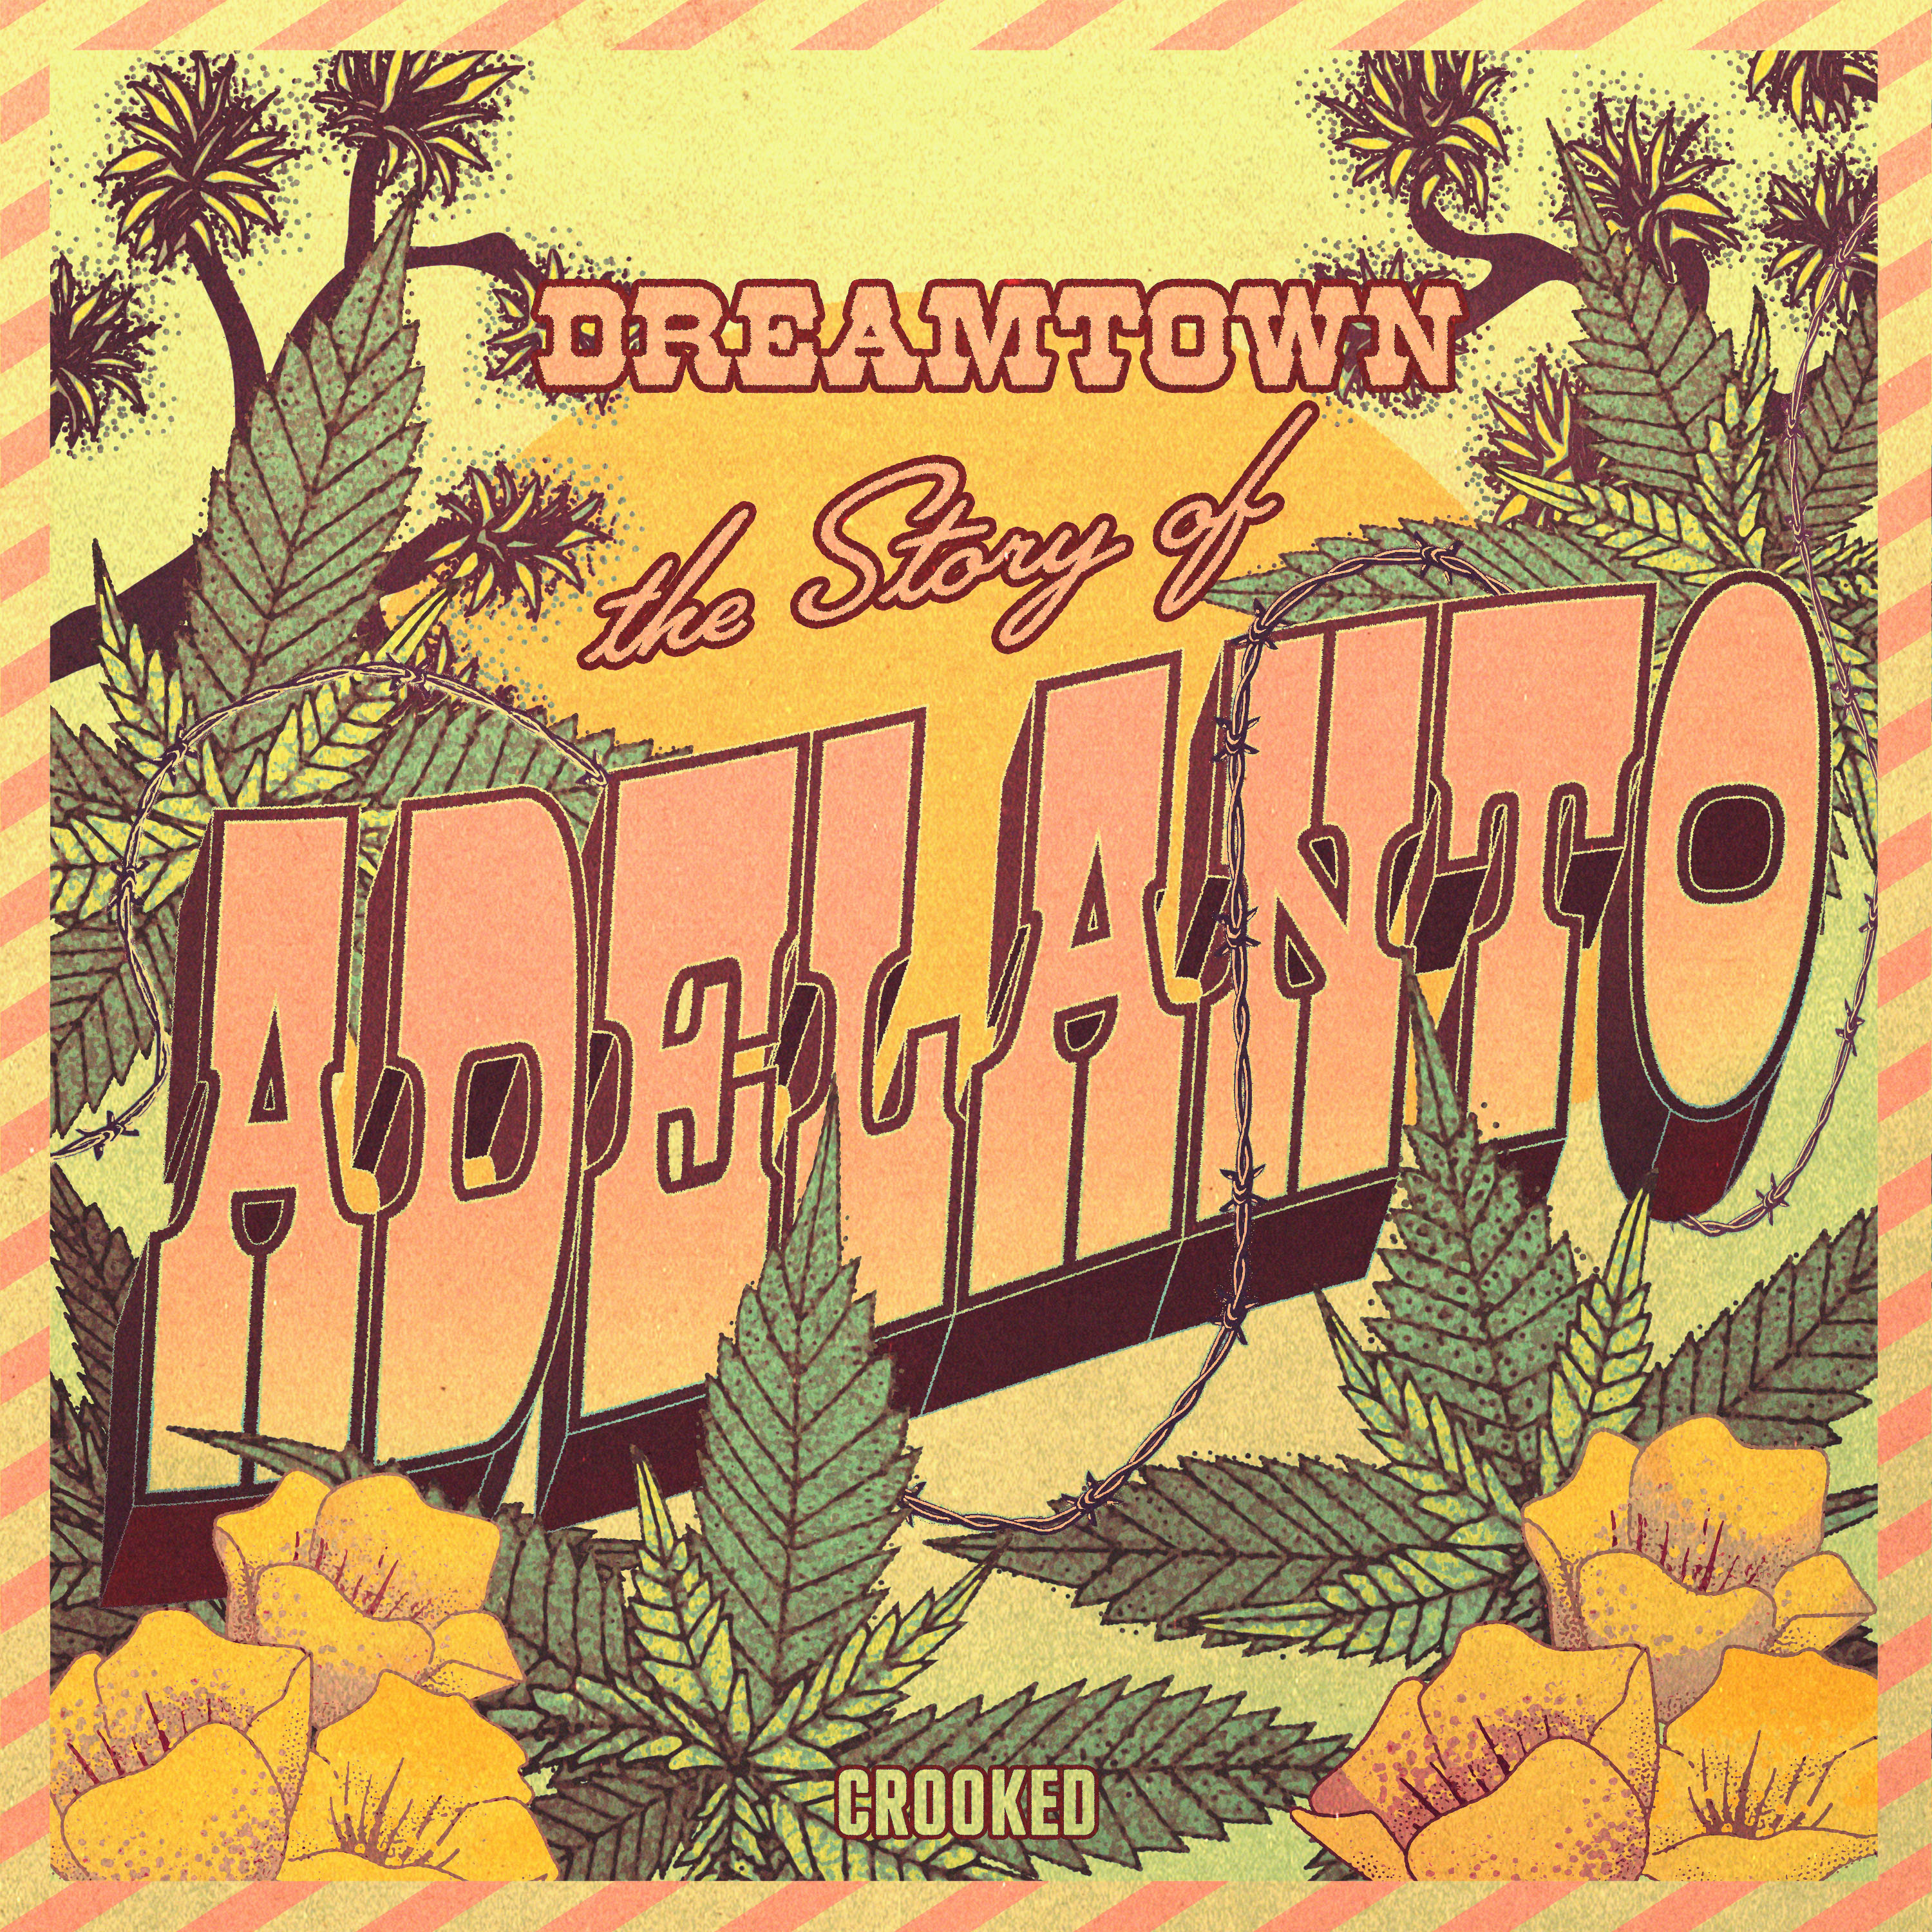 Introducing: Dreamtown: The Story of Adelanto